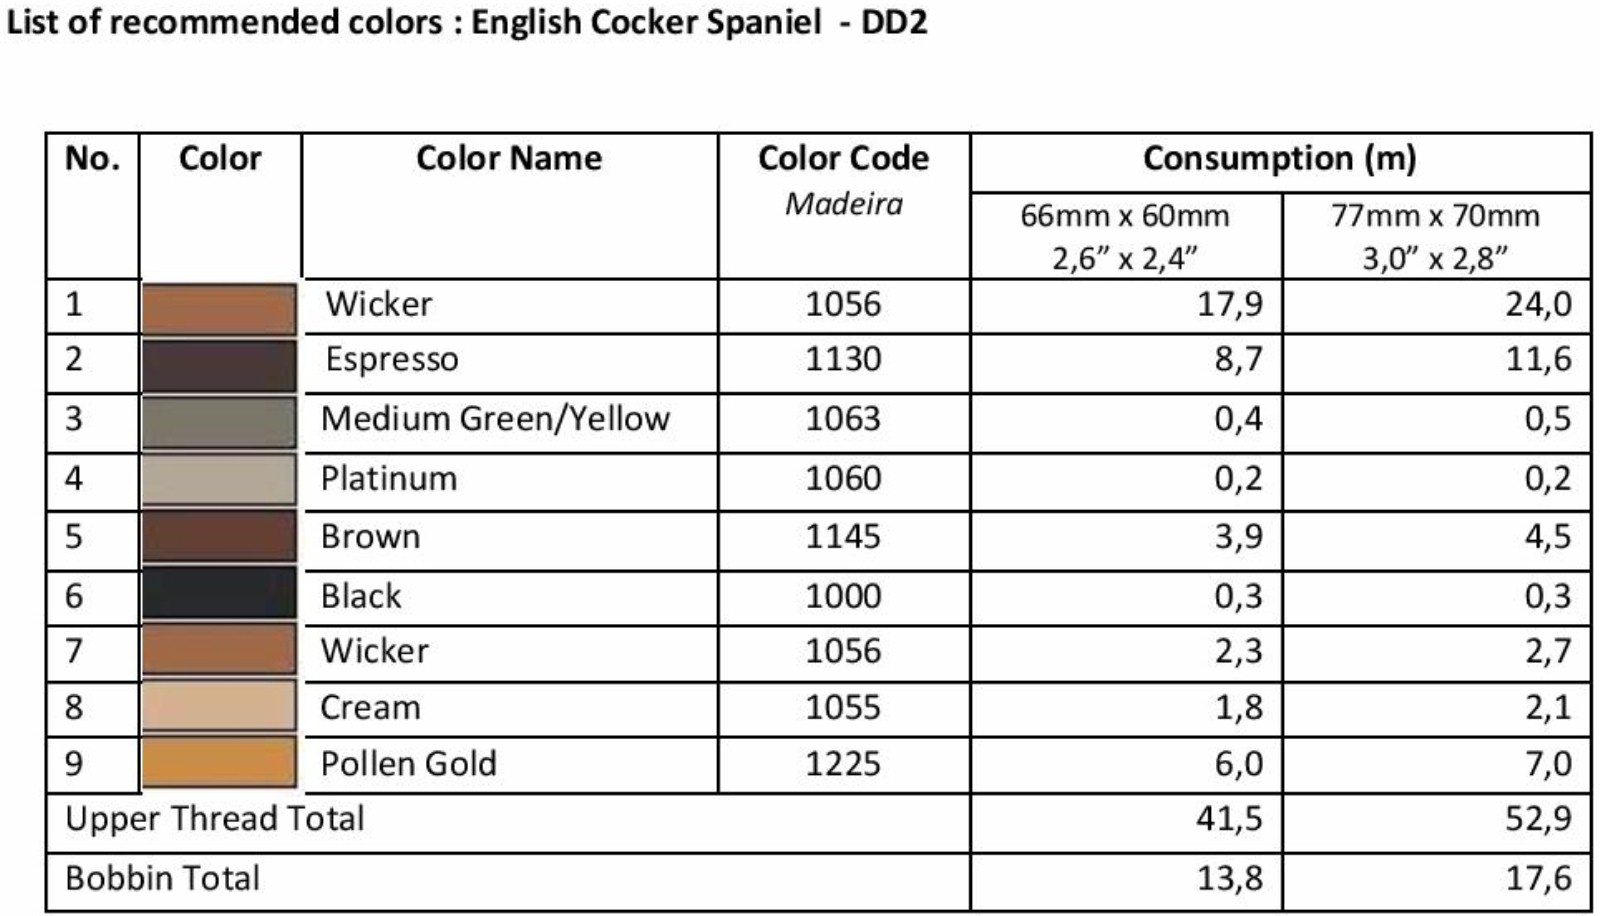 List of Recommended Colors -English Cocker Spaniel DD2